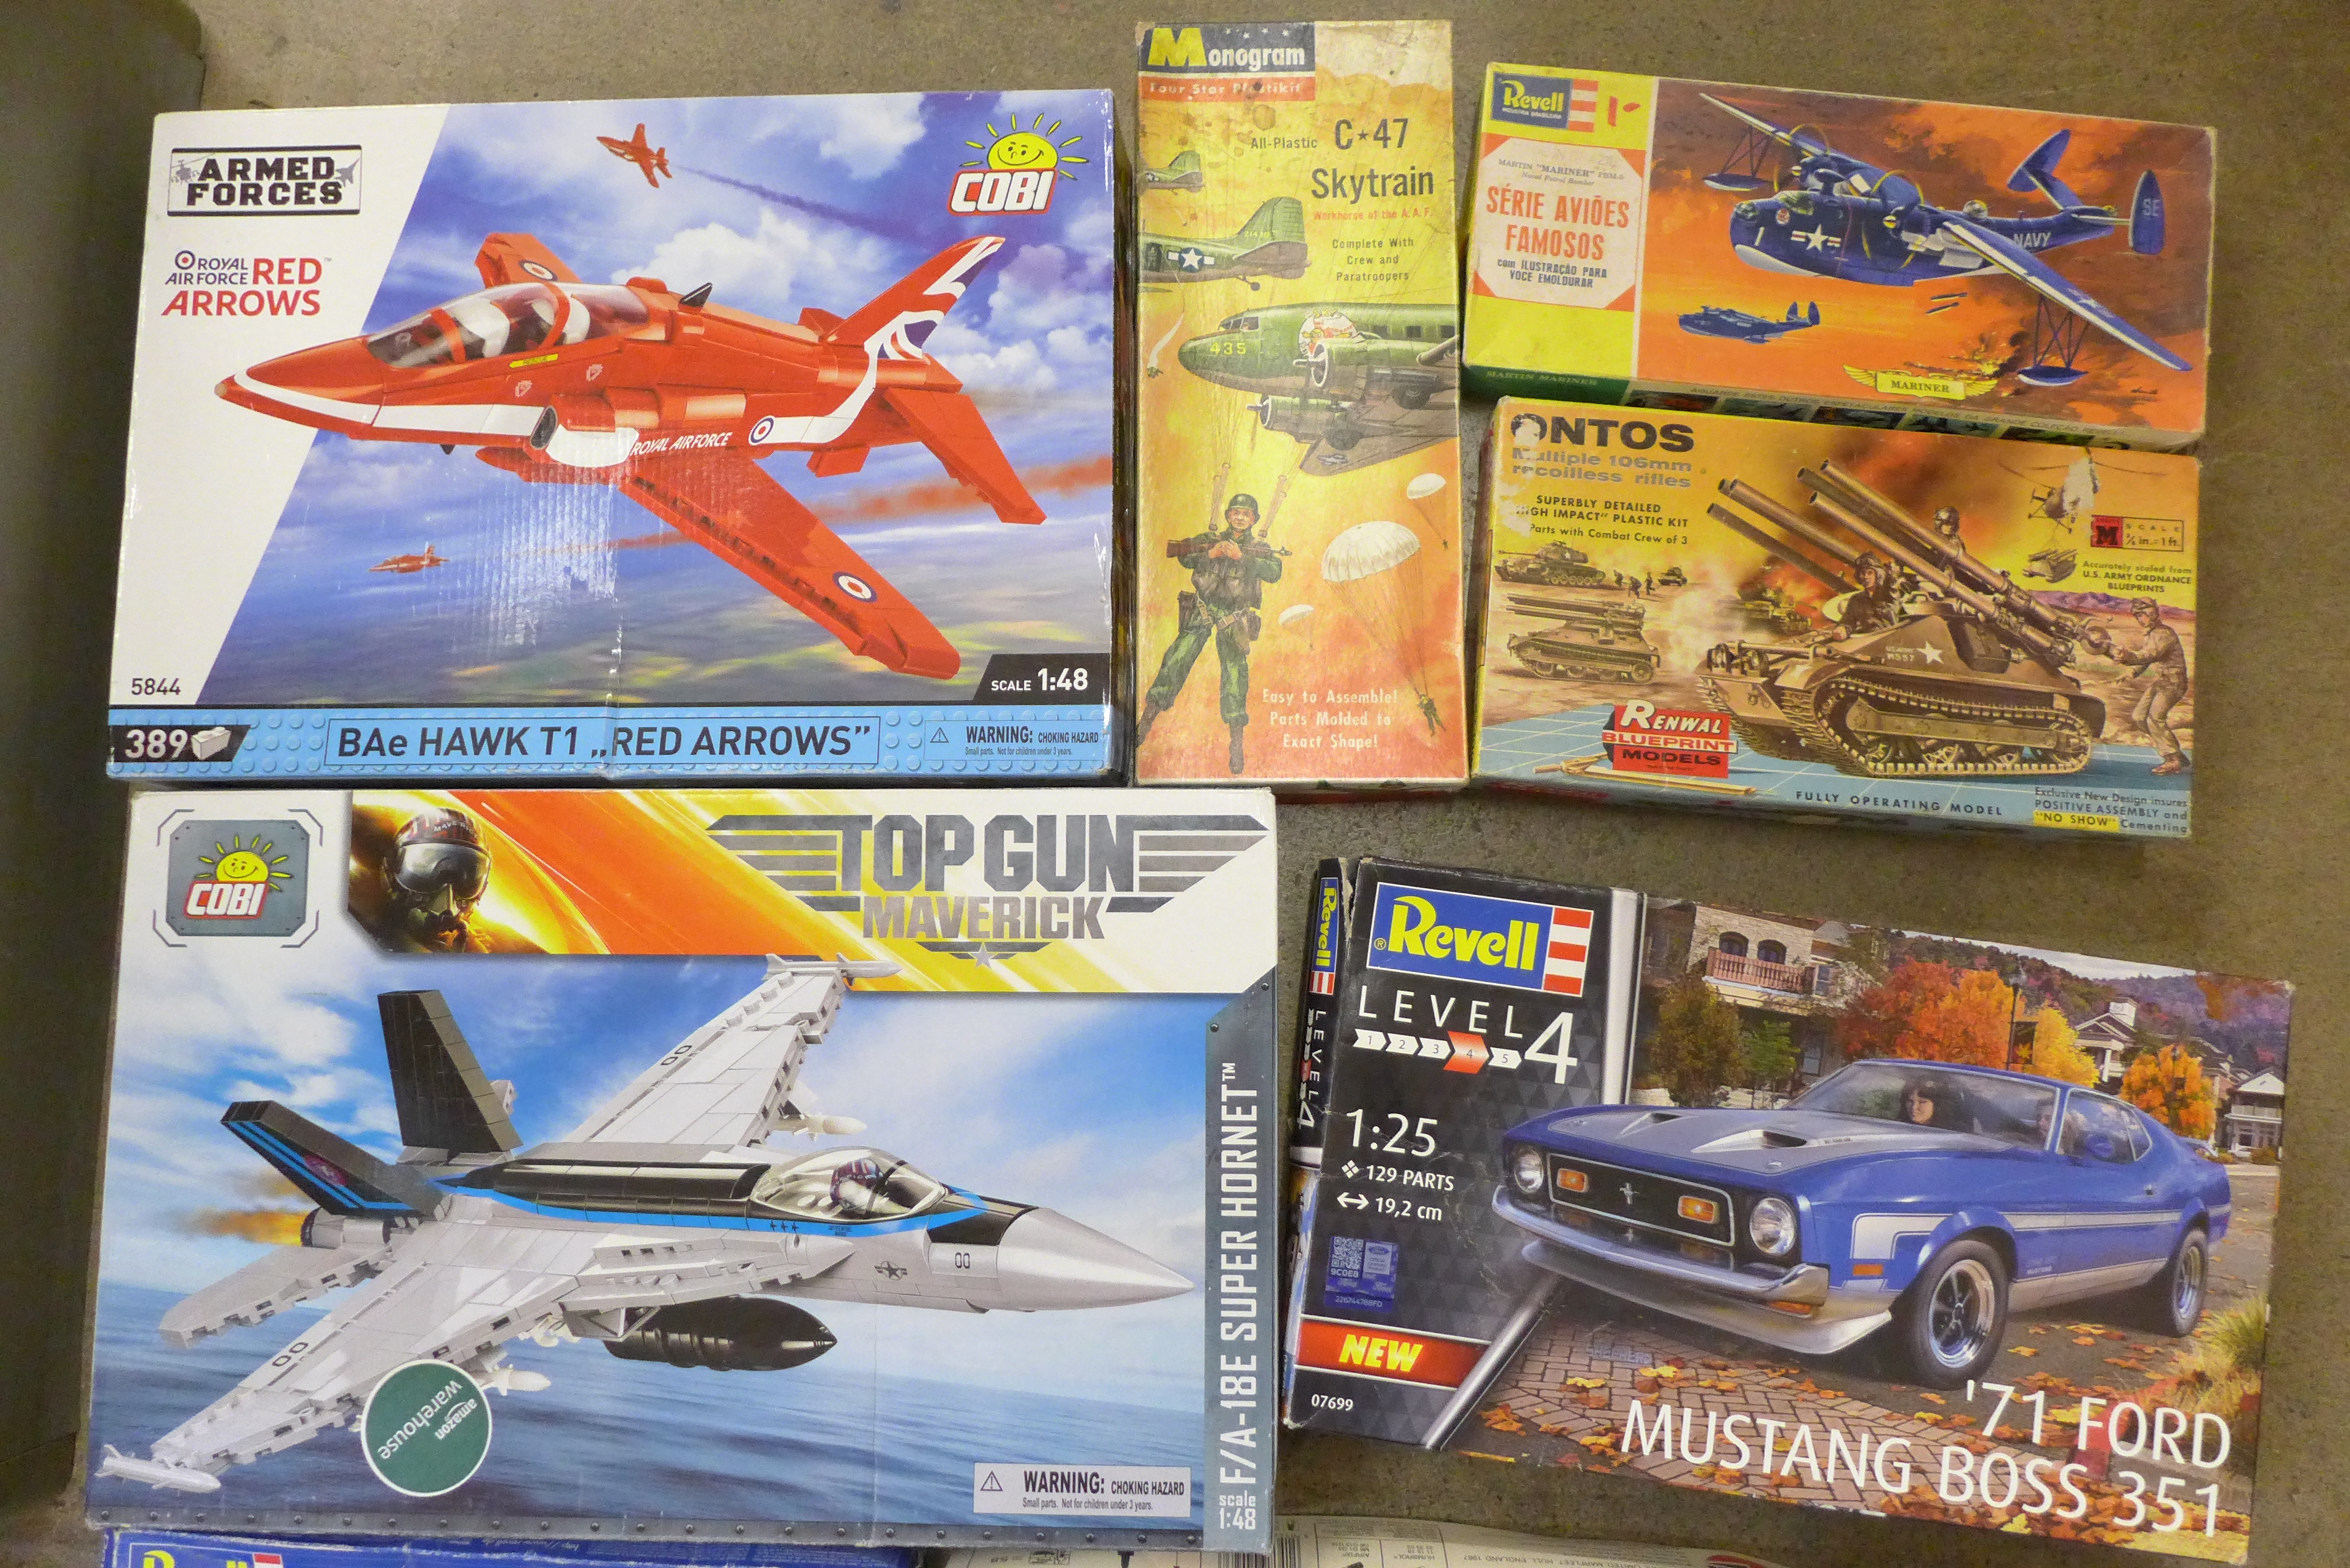 A collection of model aircraft and motor car kits, Revell, Airfix, and Monogram, etc. - Image 2 of 3